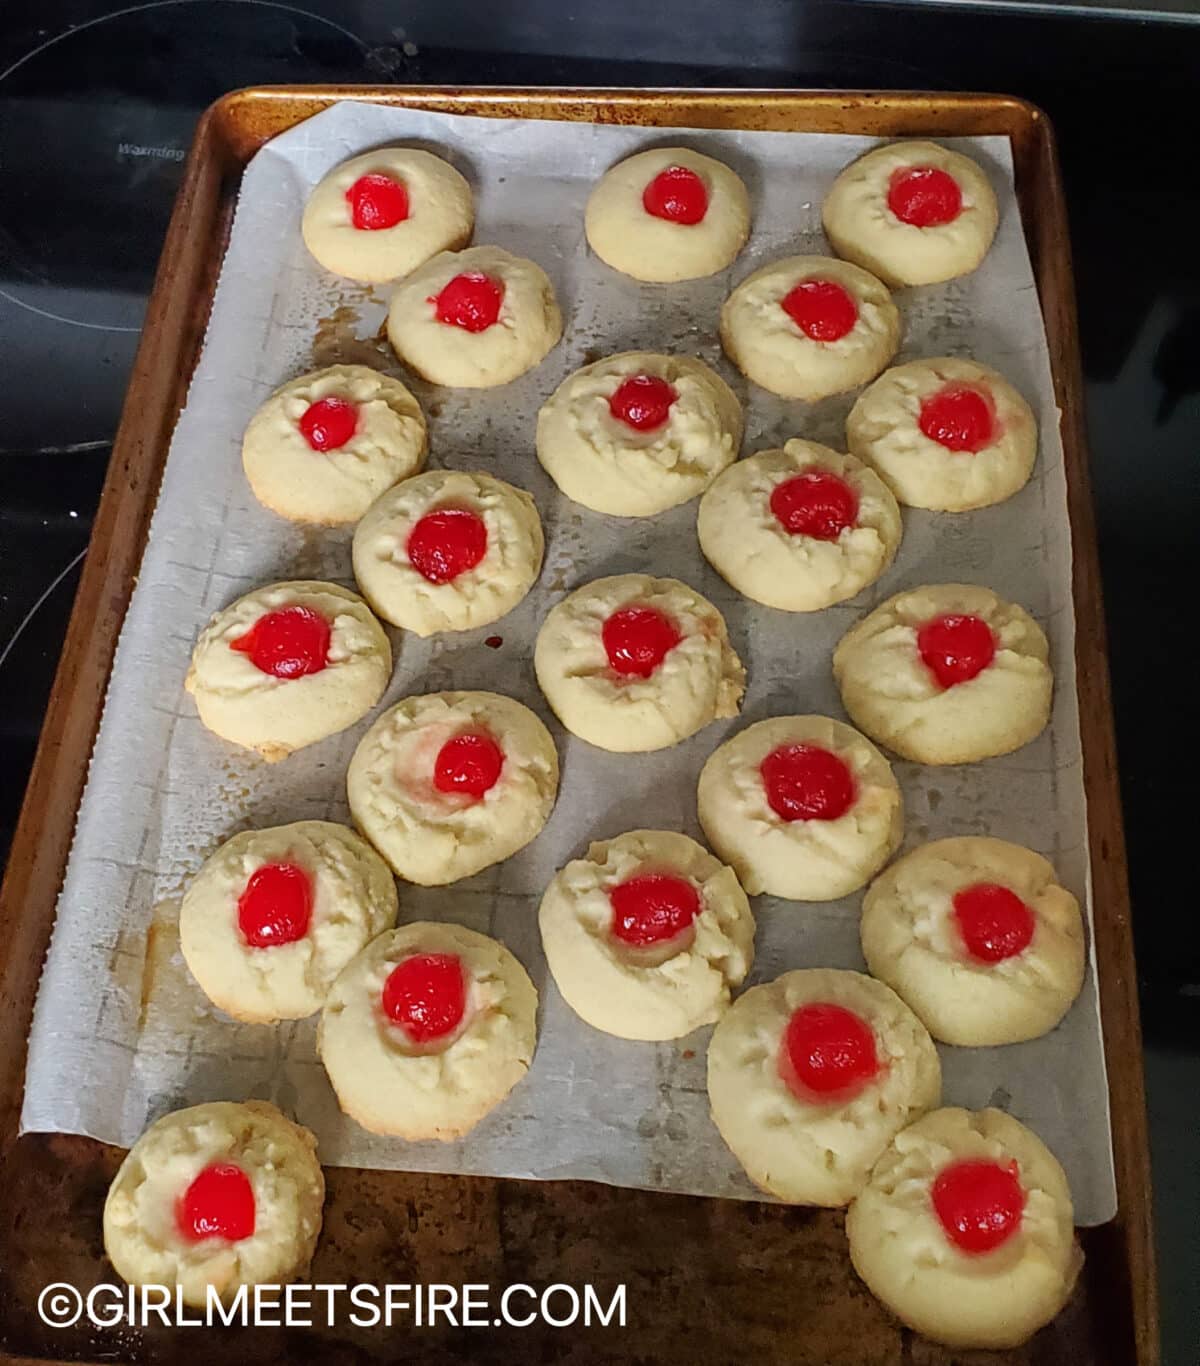 Cookie pan with polvorones straight out of the oven, topped with halved maraschino cherries